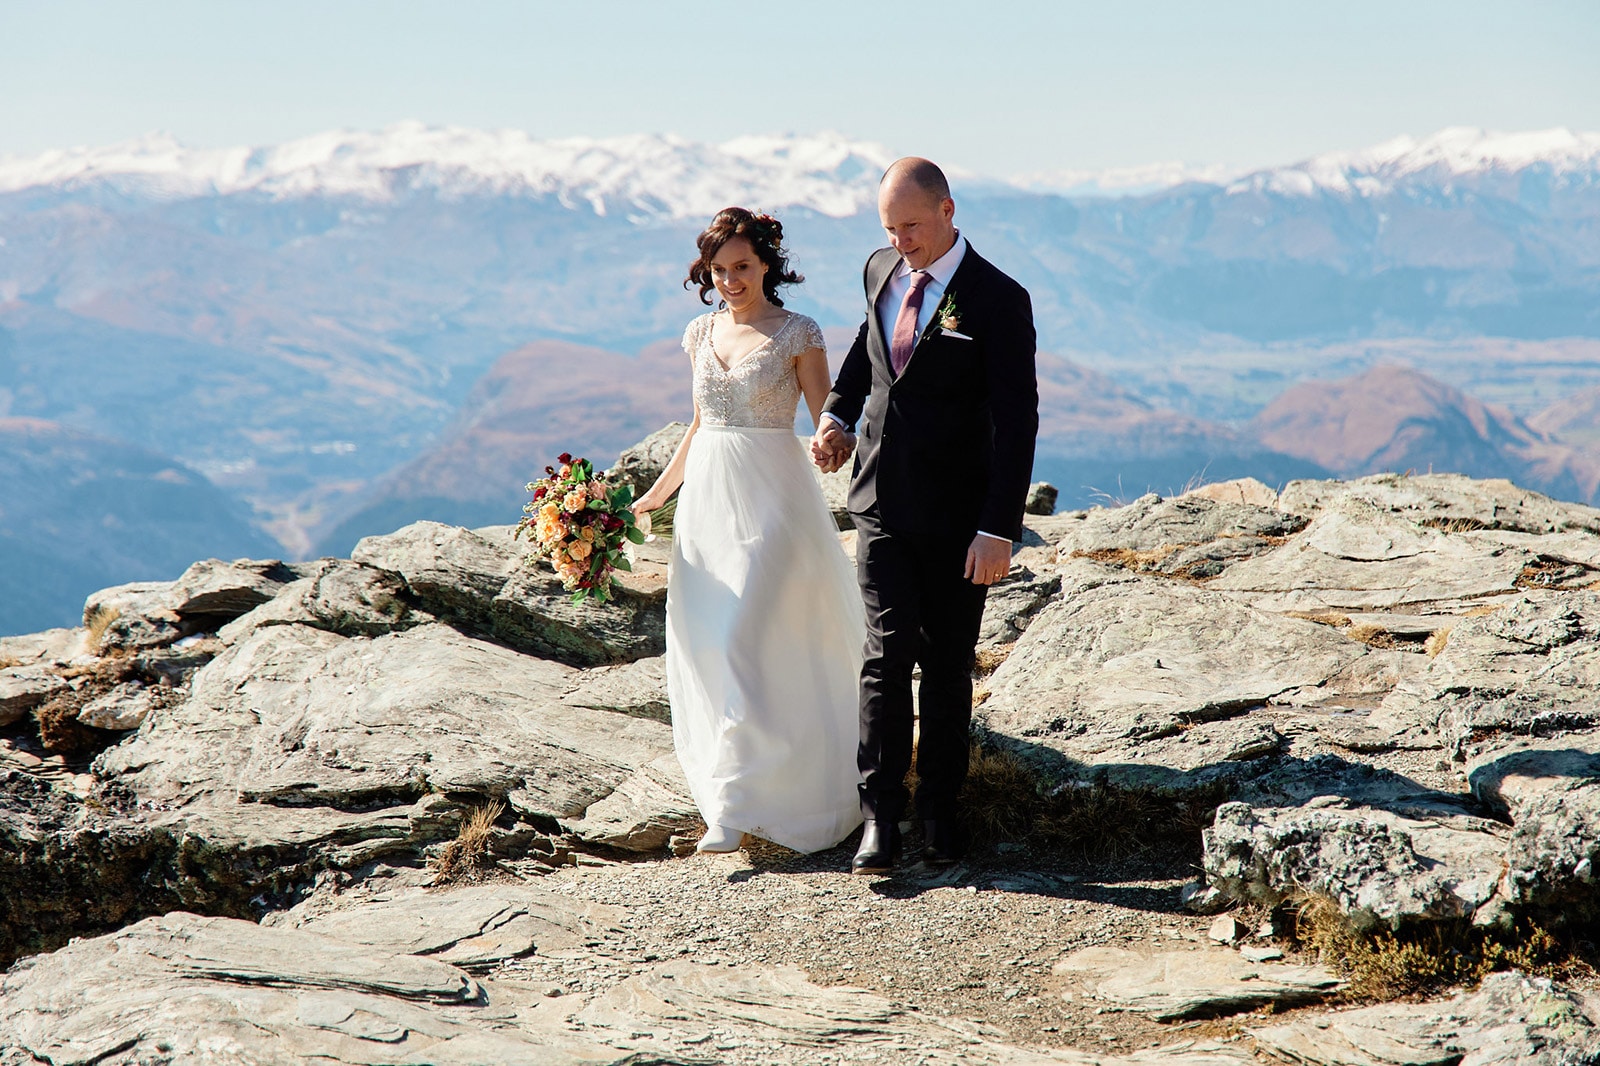 Queenstown Heli Wedding photography on The Ledge